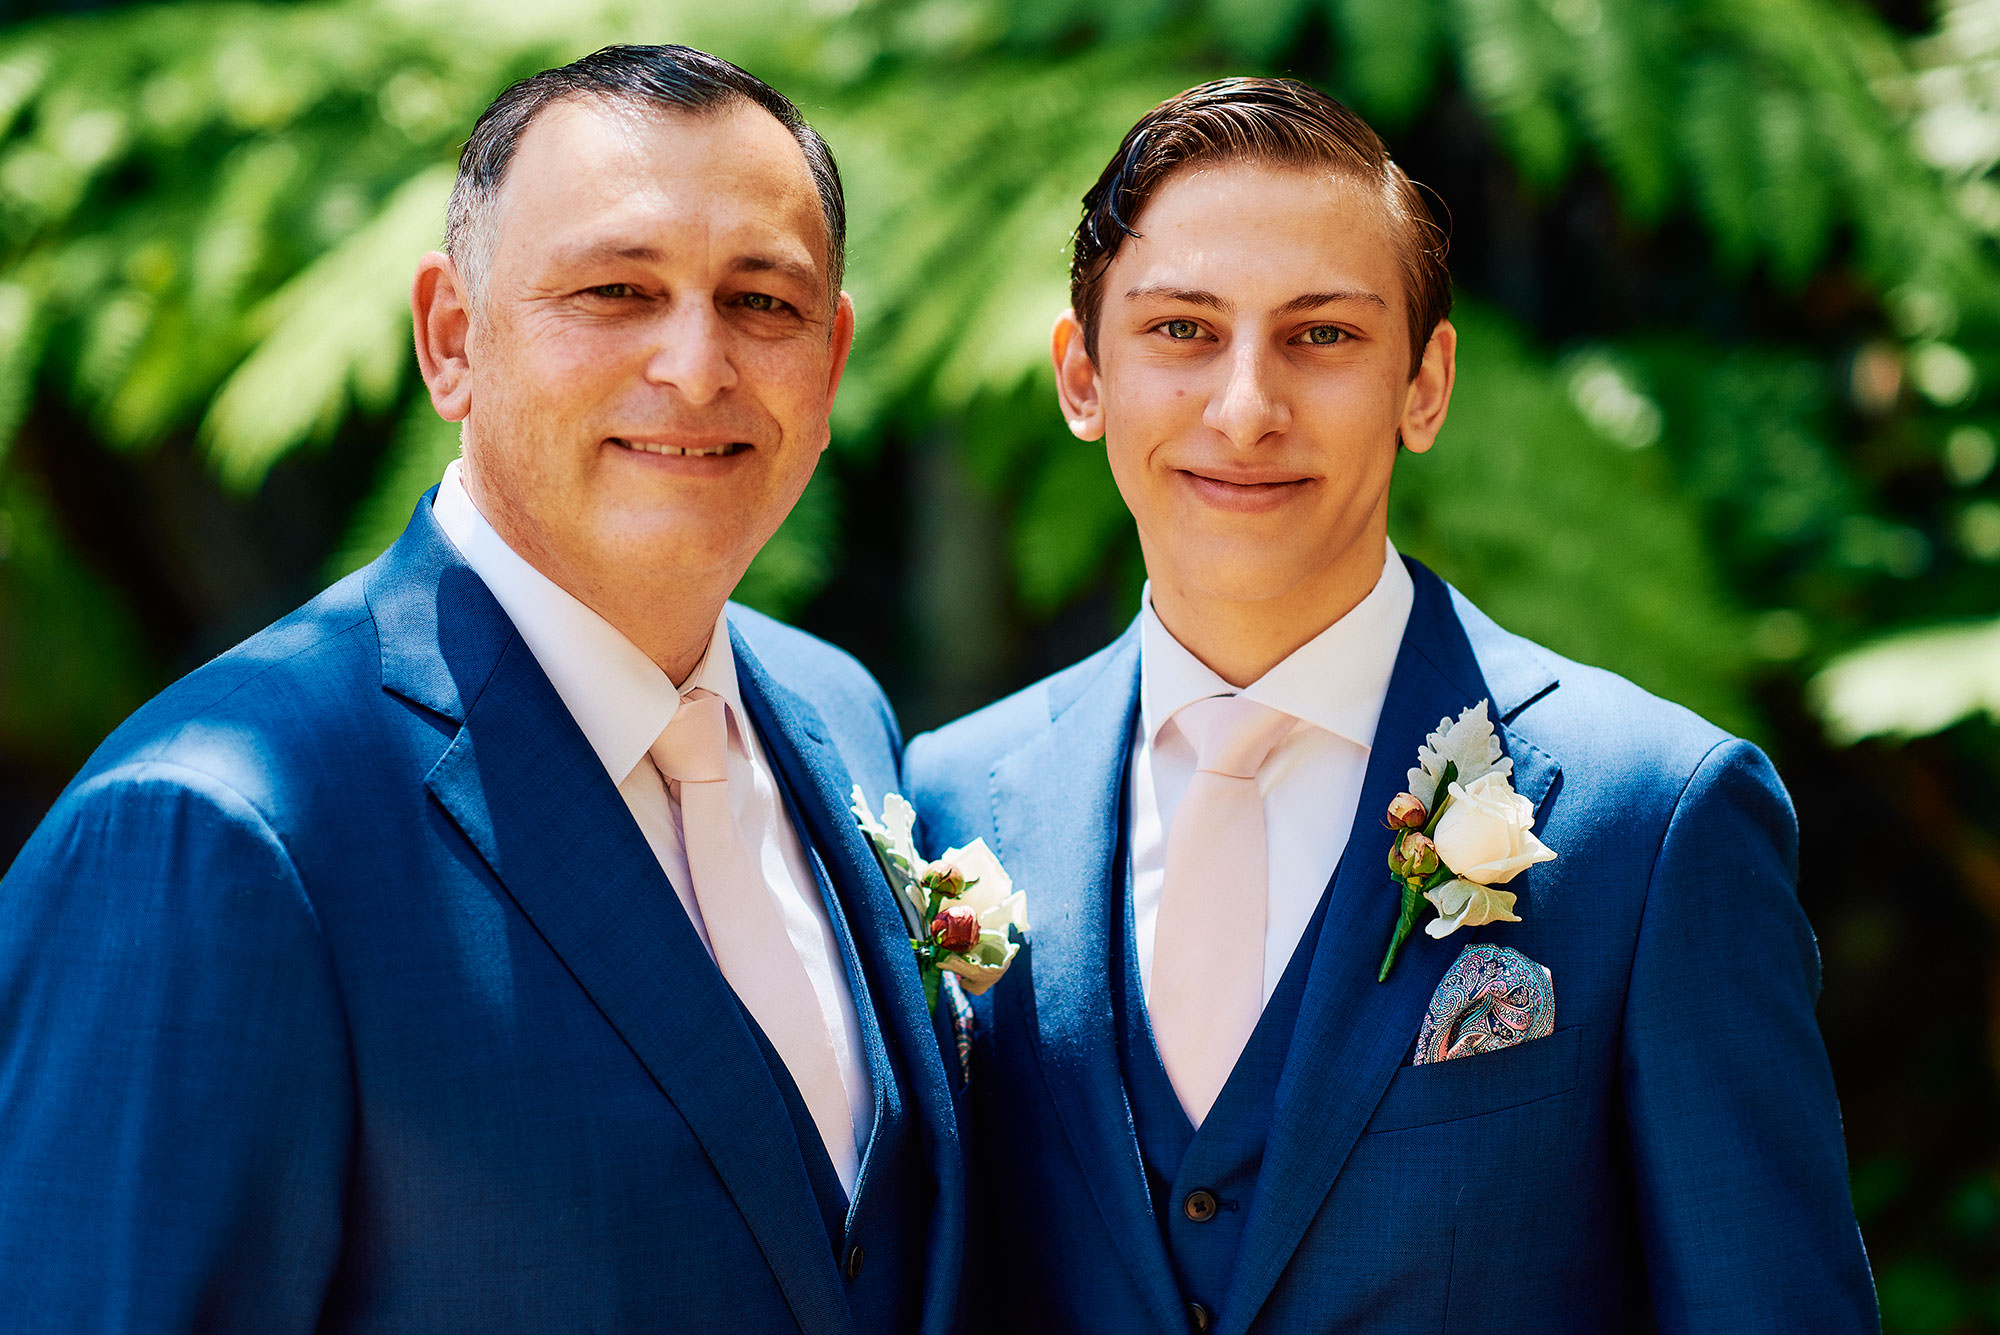 Groom and his best man son on wedding day